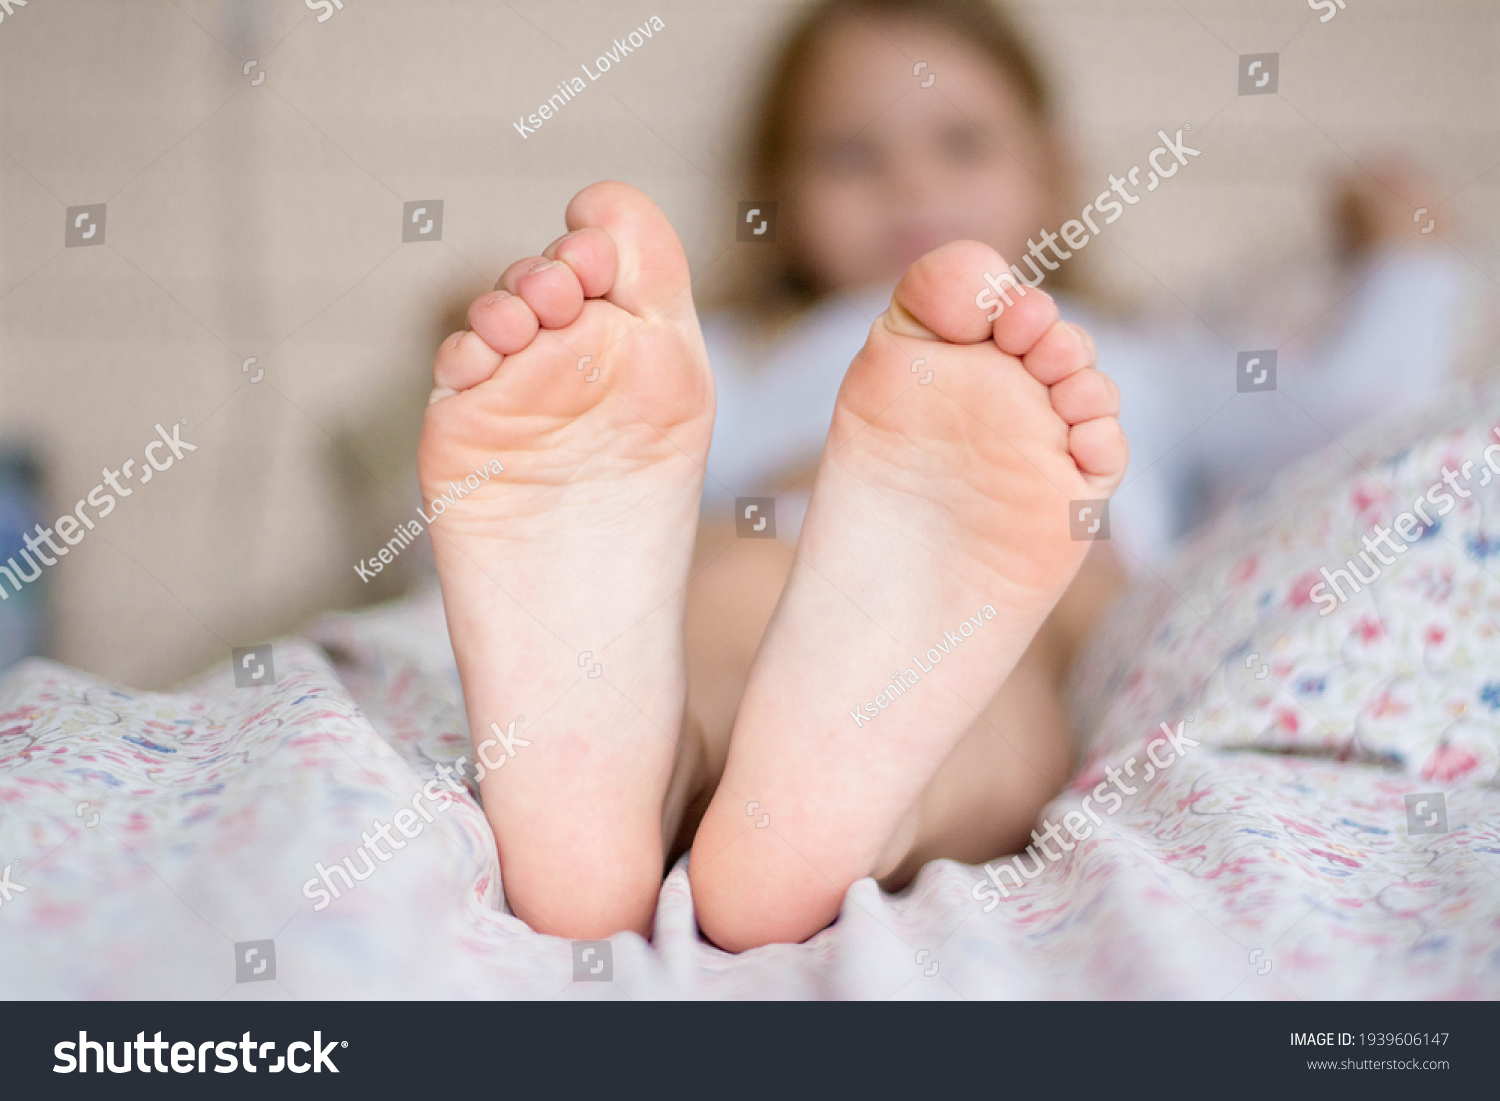 4592 Teen Girl Feet Stock Photos, Images & Pictures